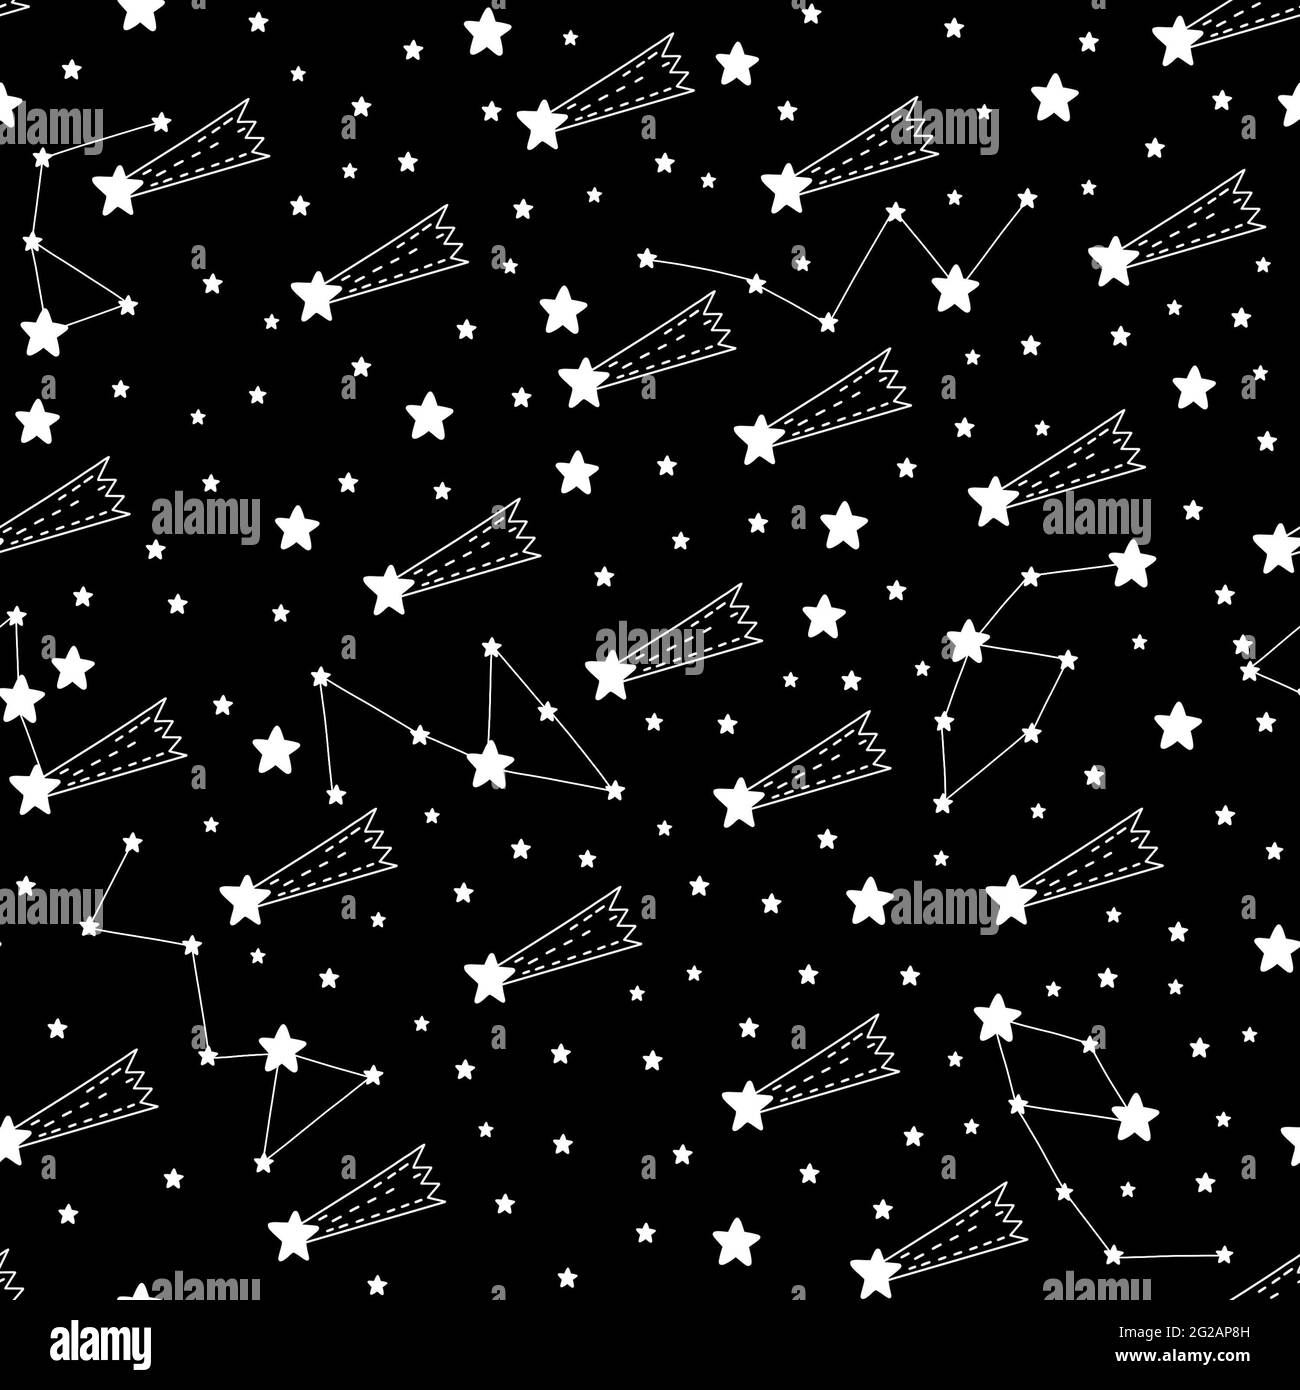 Seamless pattern shooting star abstract symbol space.Astrology background doodle style. Stock Photo